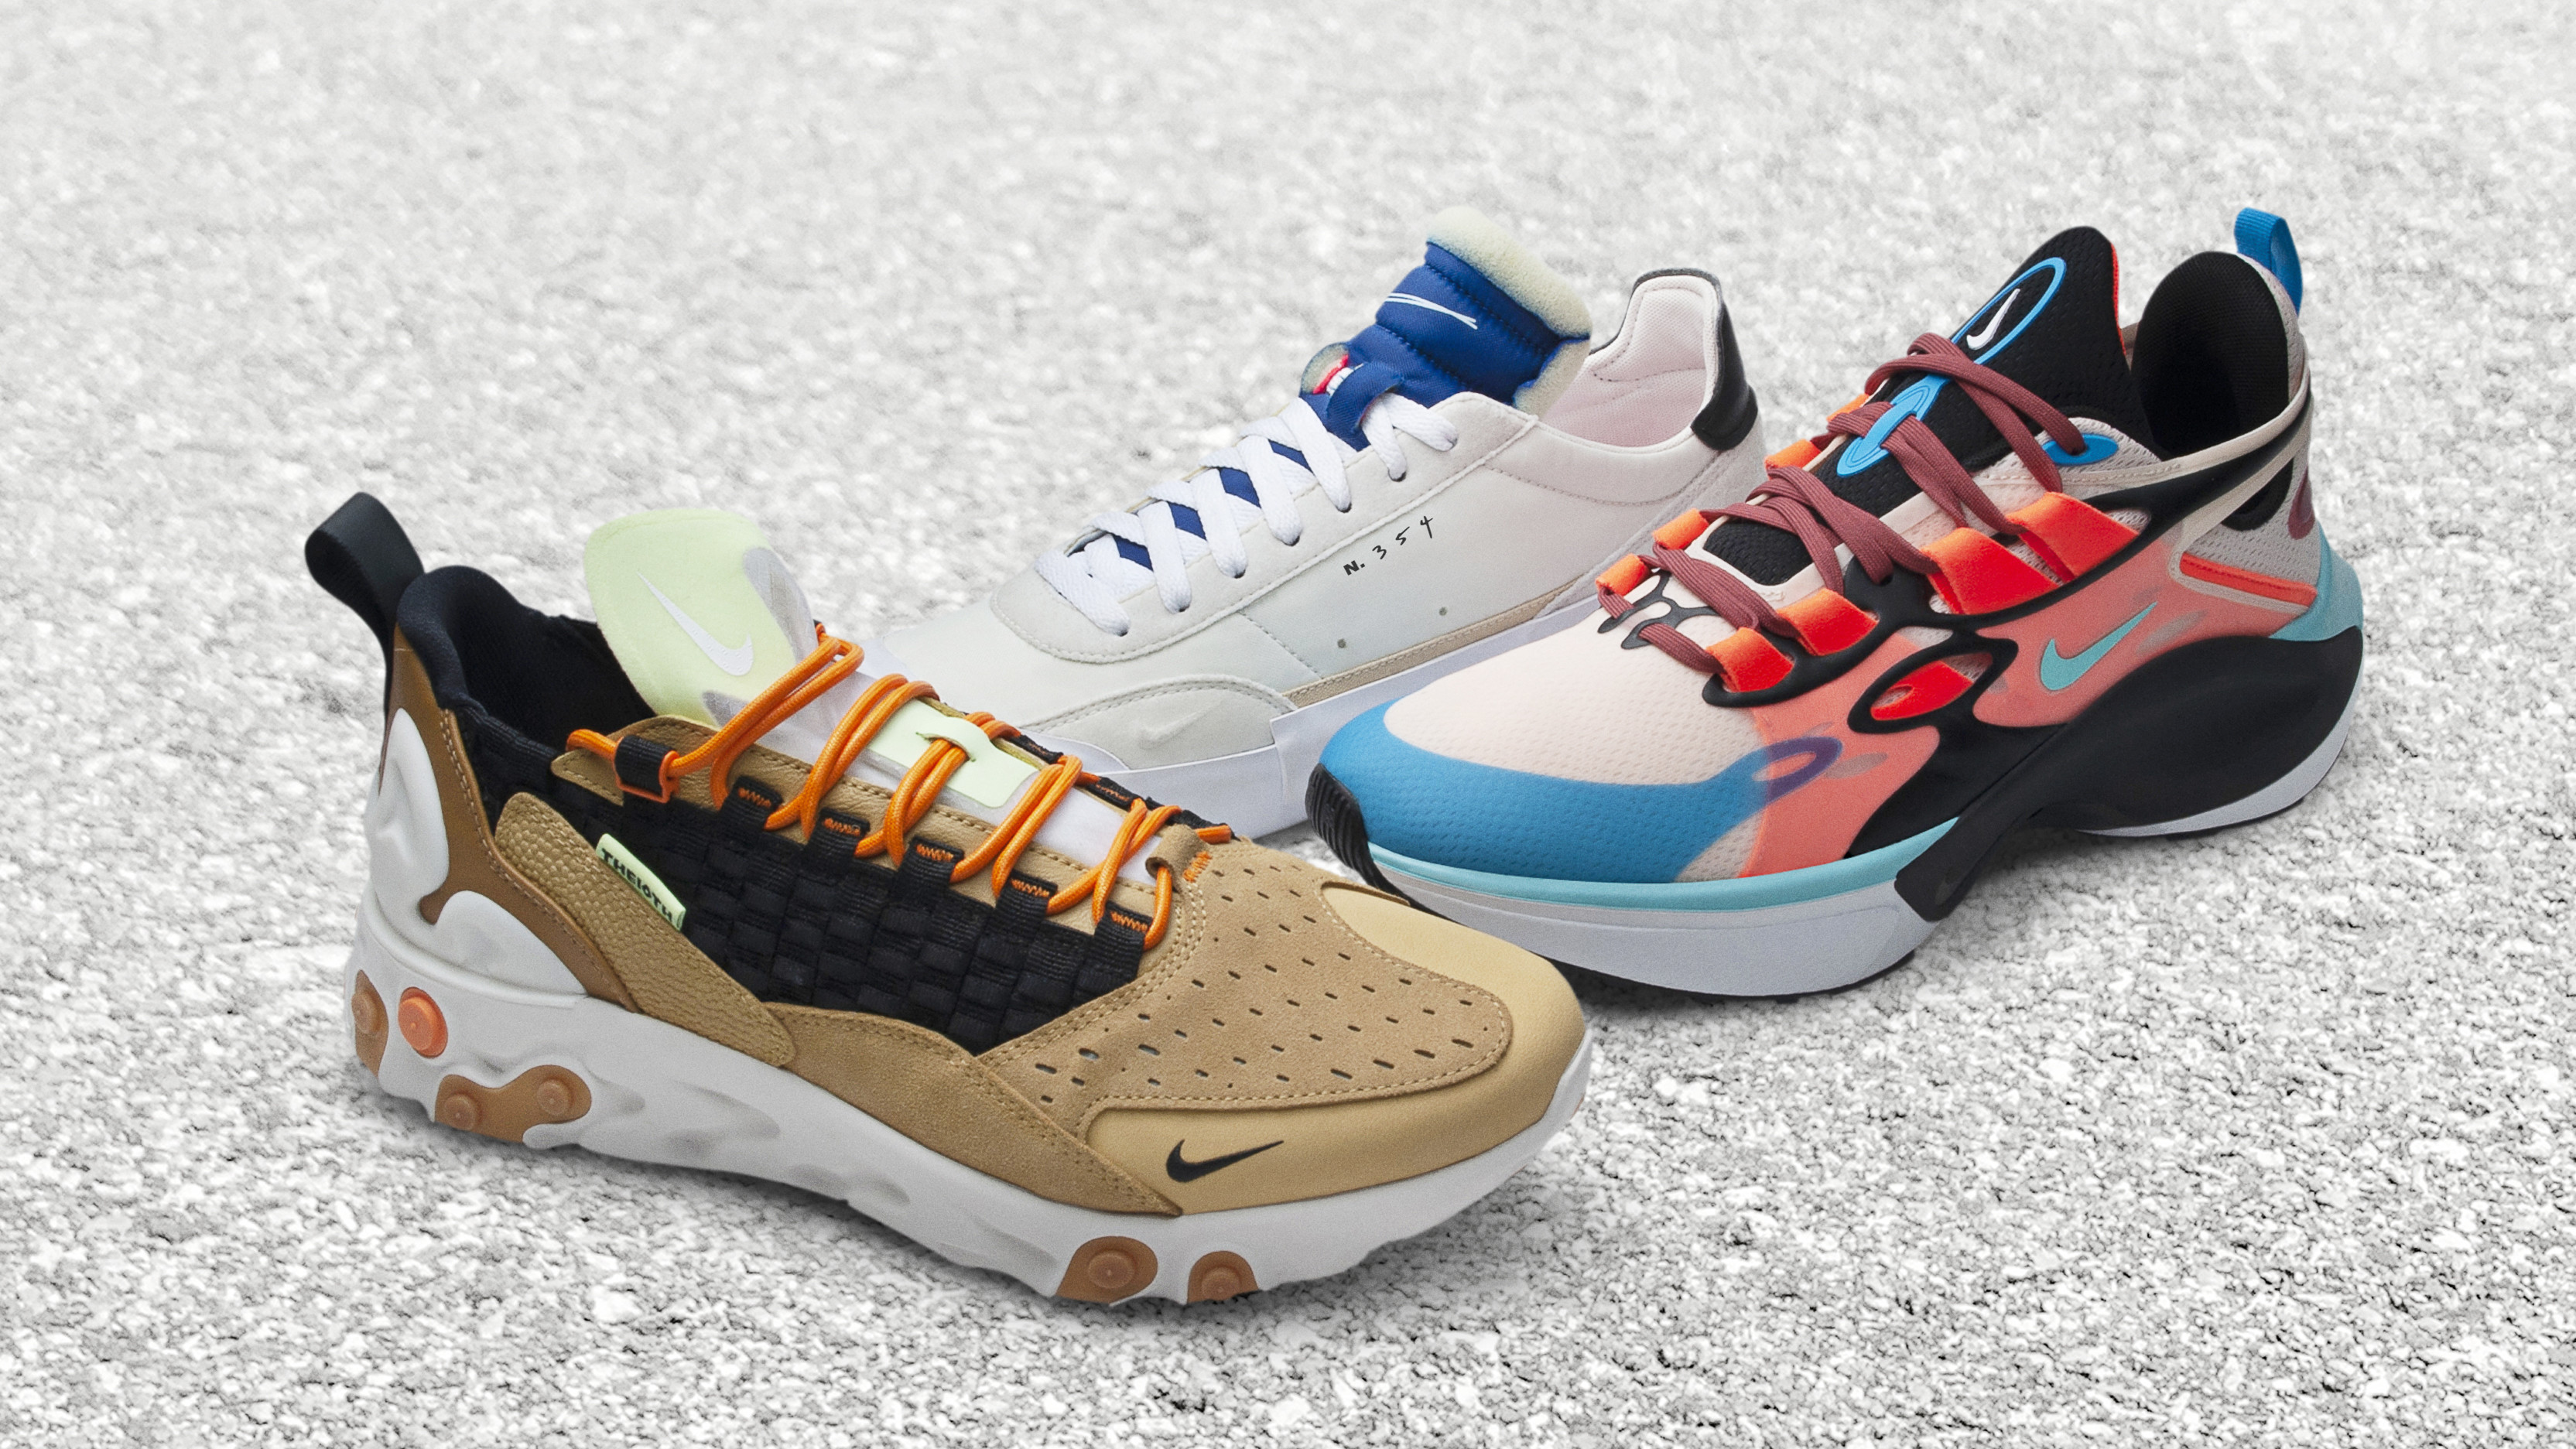 Nike Sportswear Celebrates Experimentation With Its Latest Trio of Labels